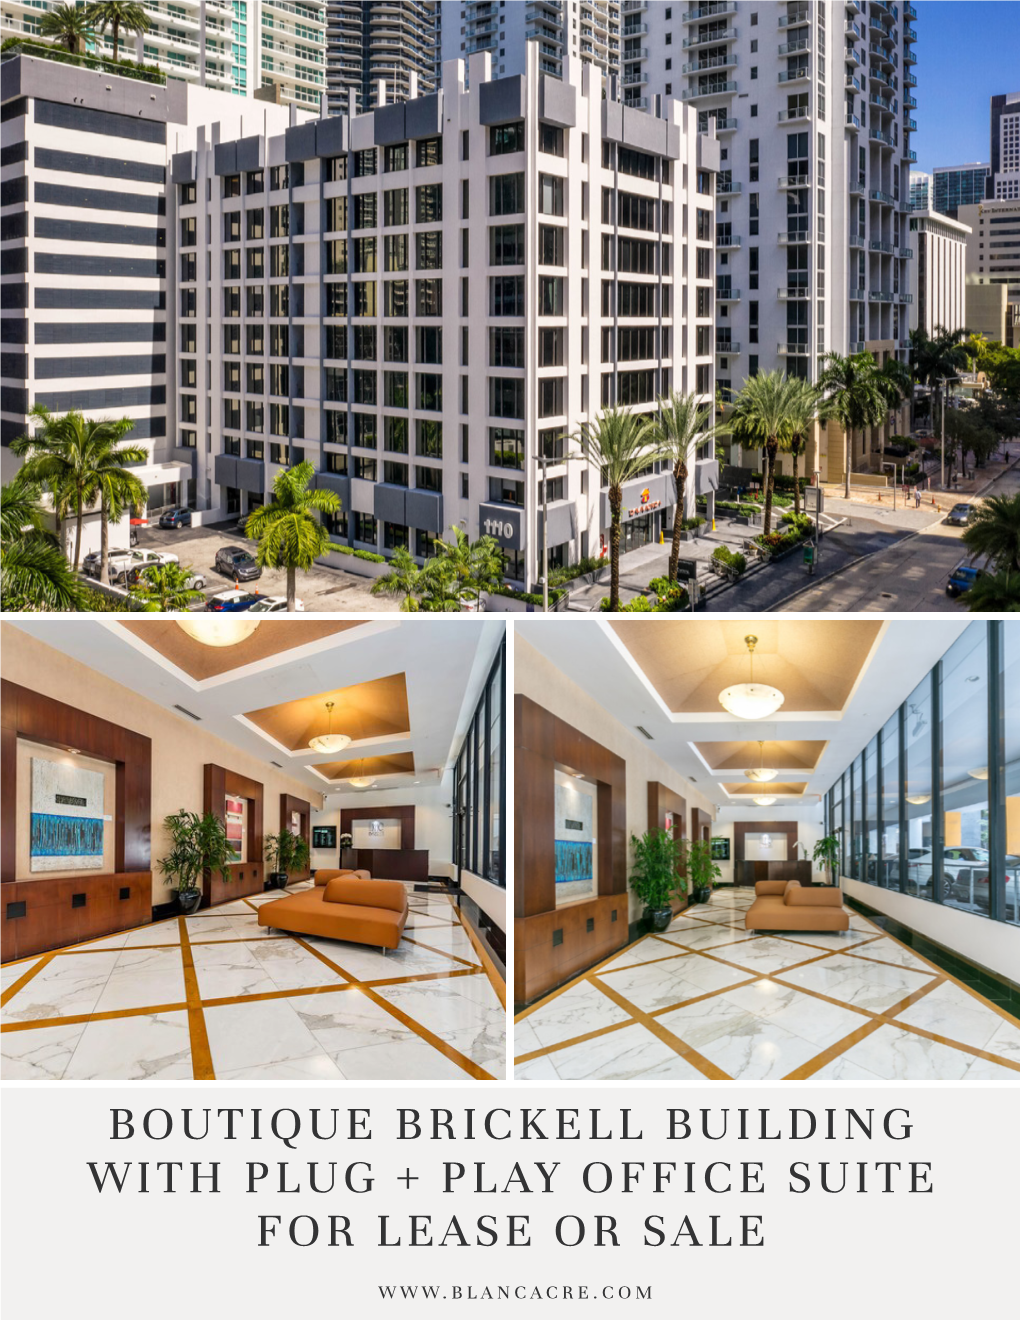 Boutique Brickell Building with Plug + Play Office Suite for Lease Or Sale